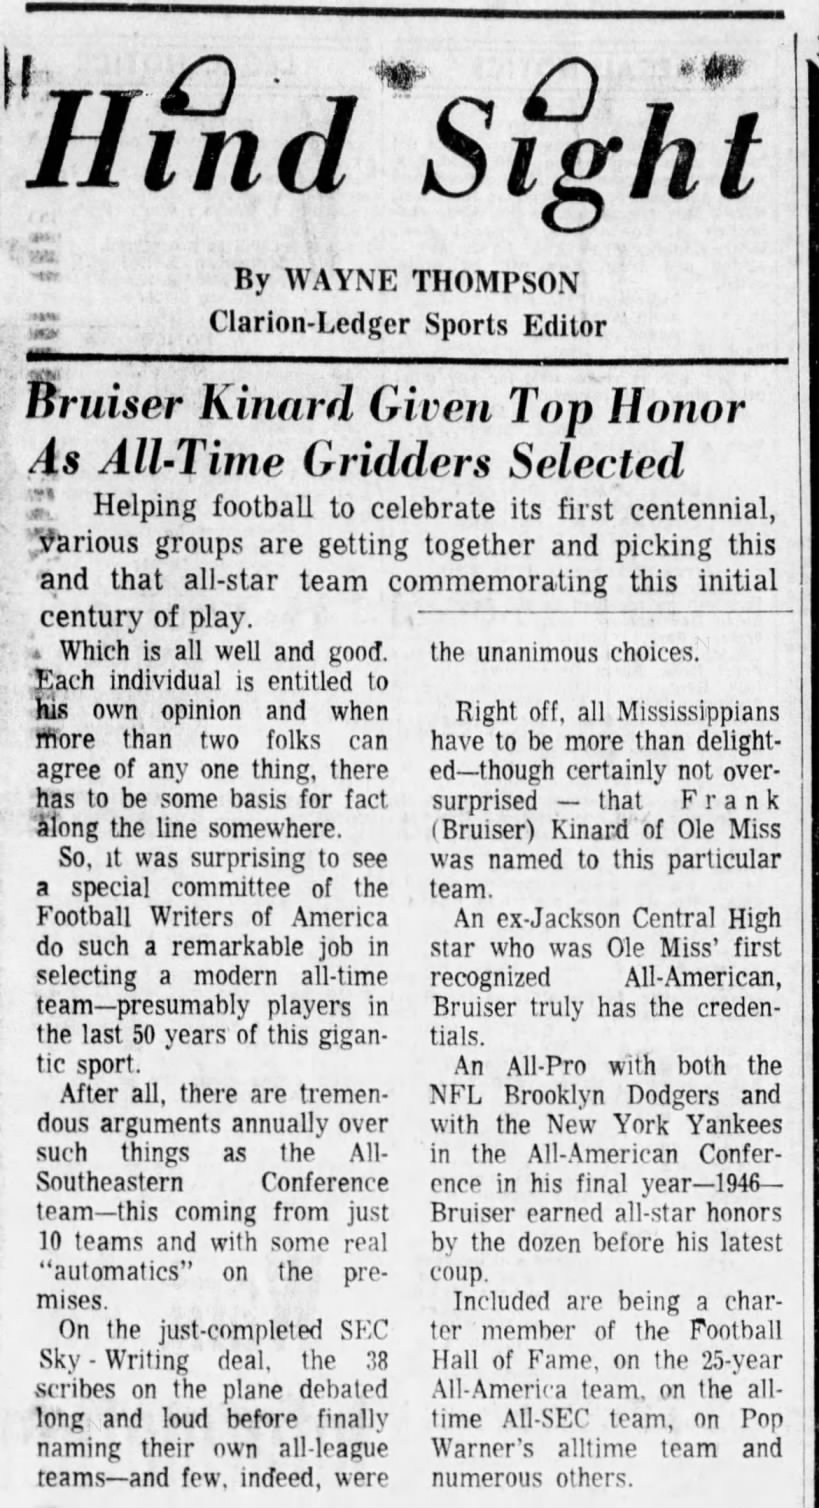 Bruiser Kinard Given Top Honor As All-Time Gridders Selected